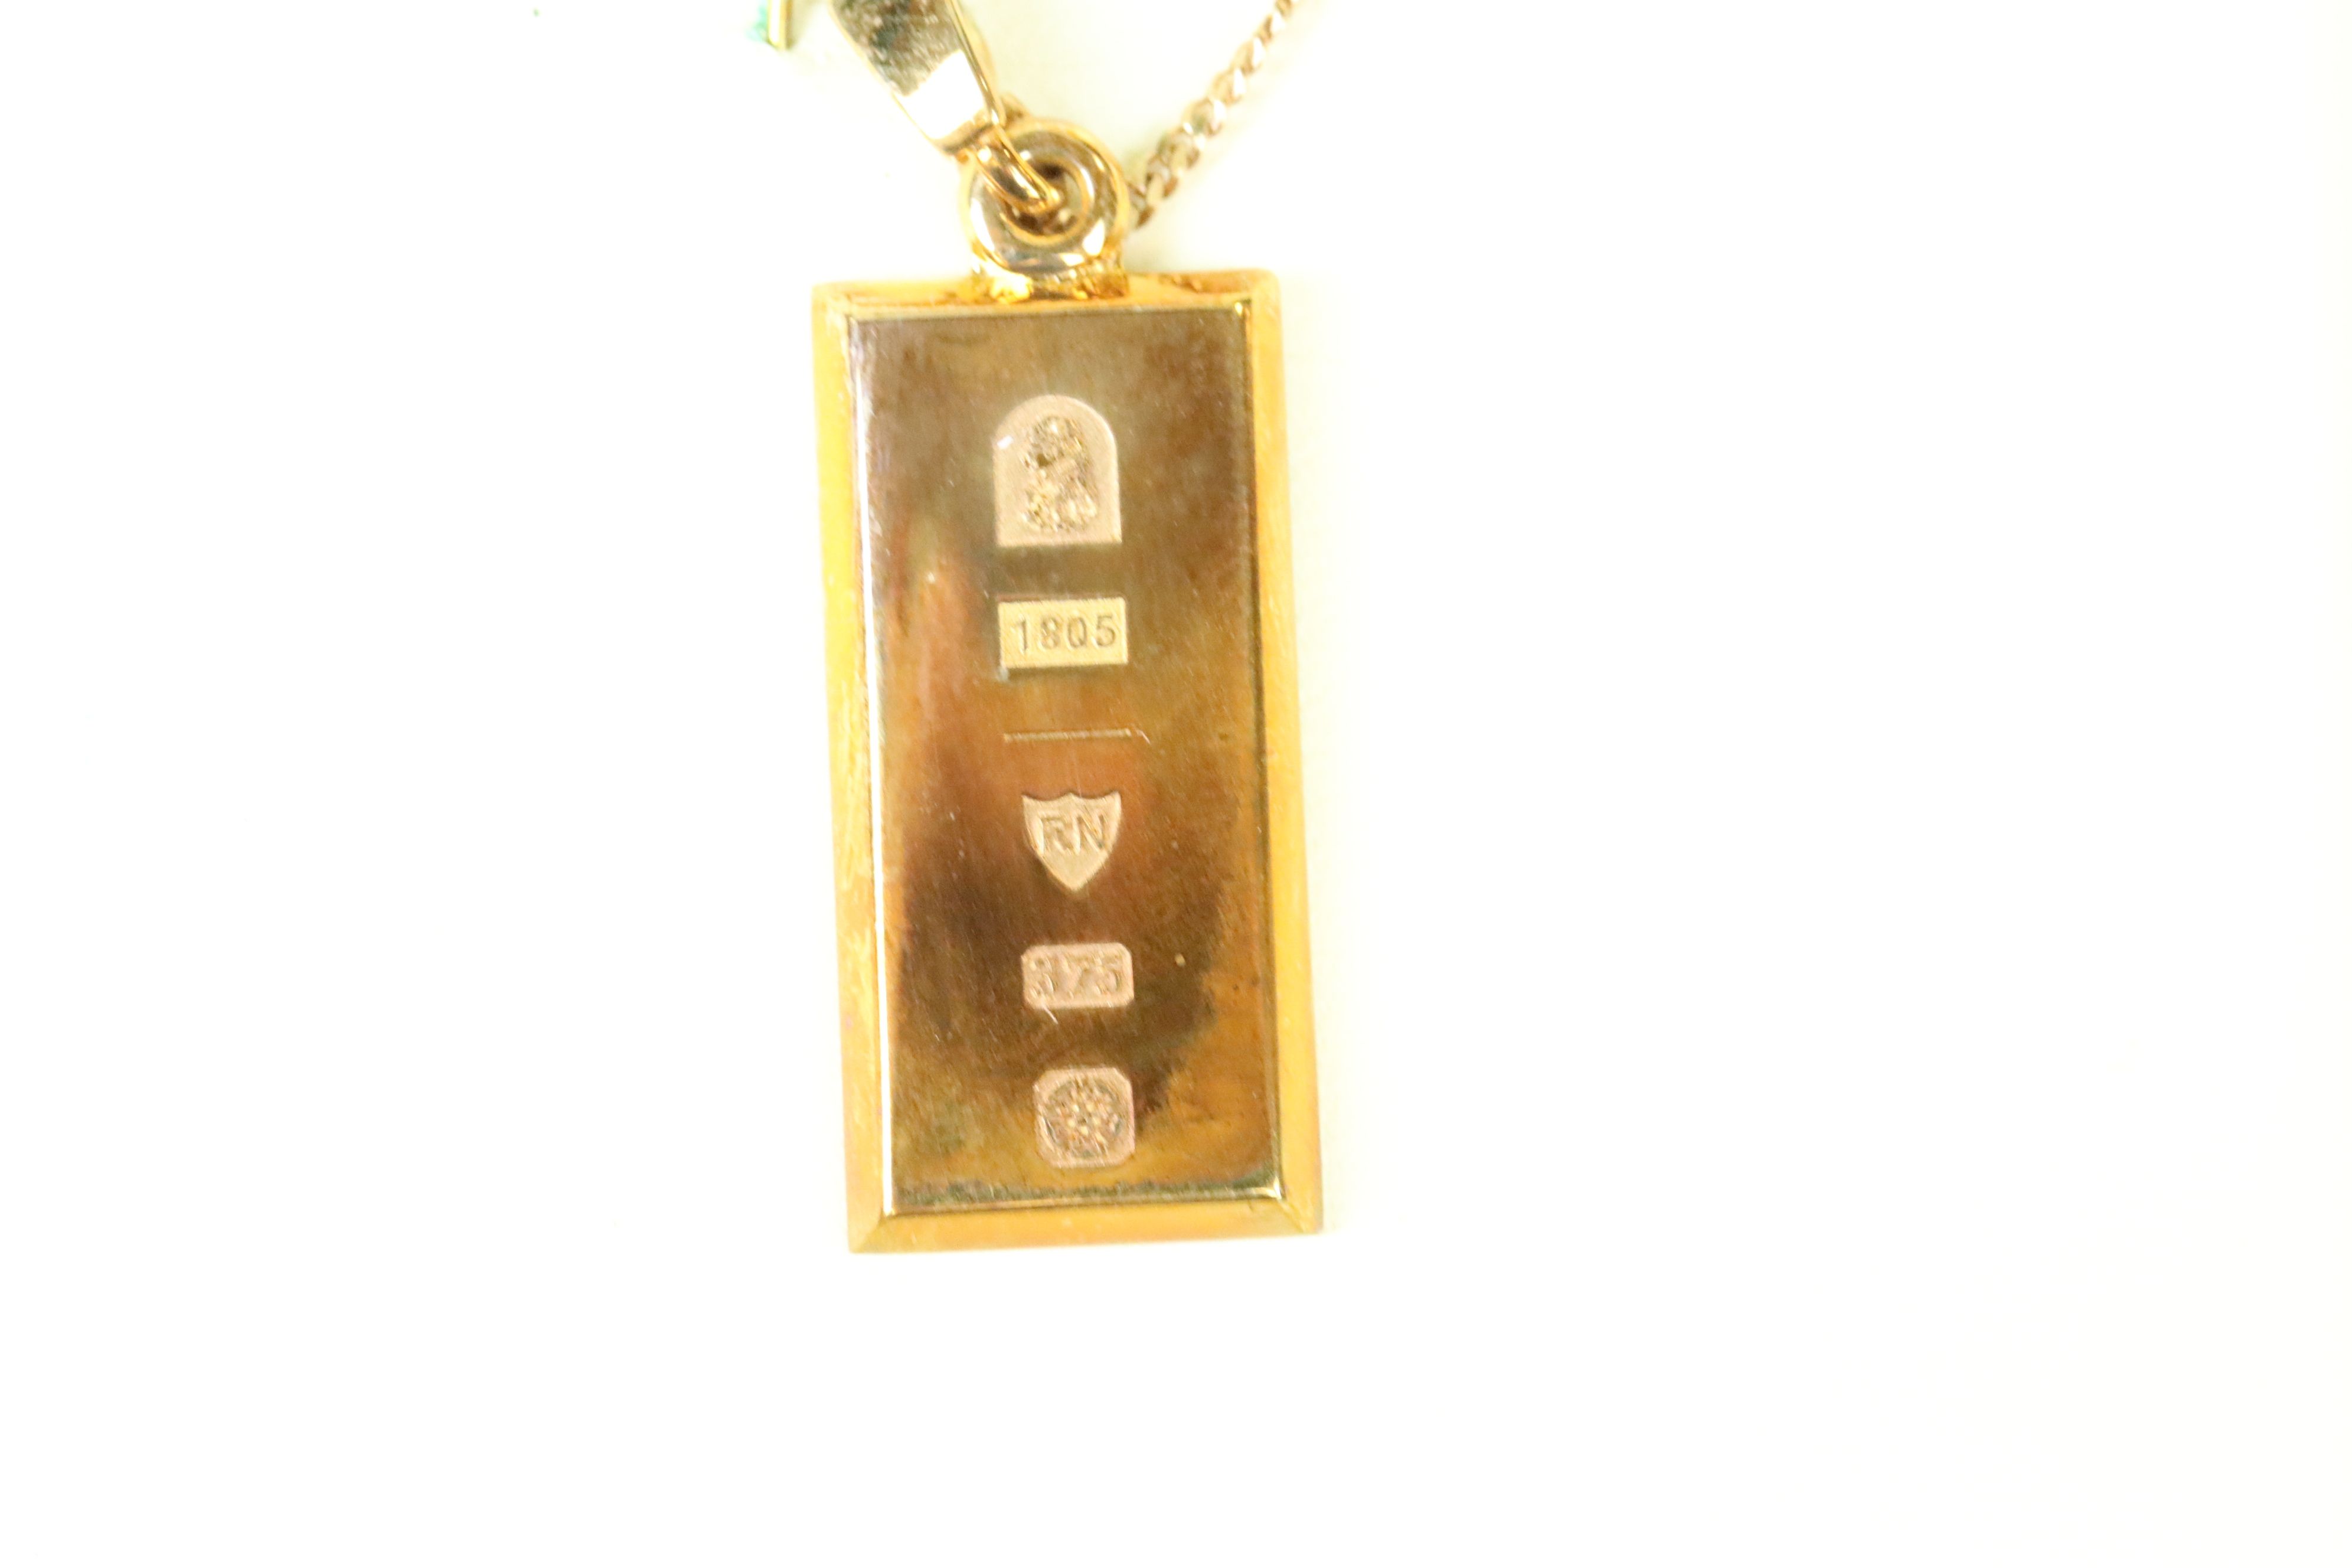 Royal Mint Classics limited edition 9ct gold ingot pendant necklace, 9ct gold chain, no. 277/1805, - Image 2 of 4